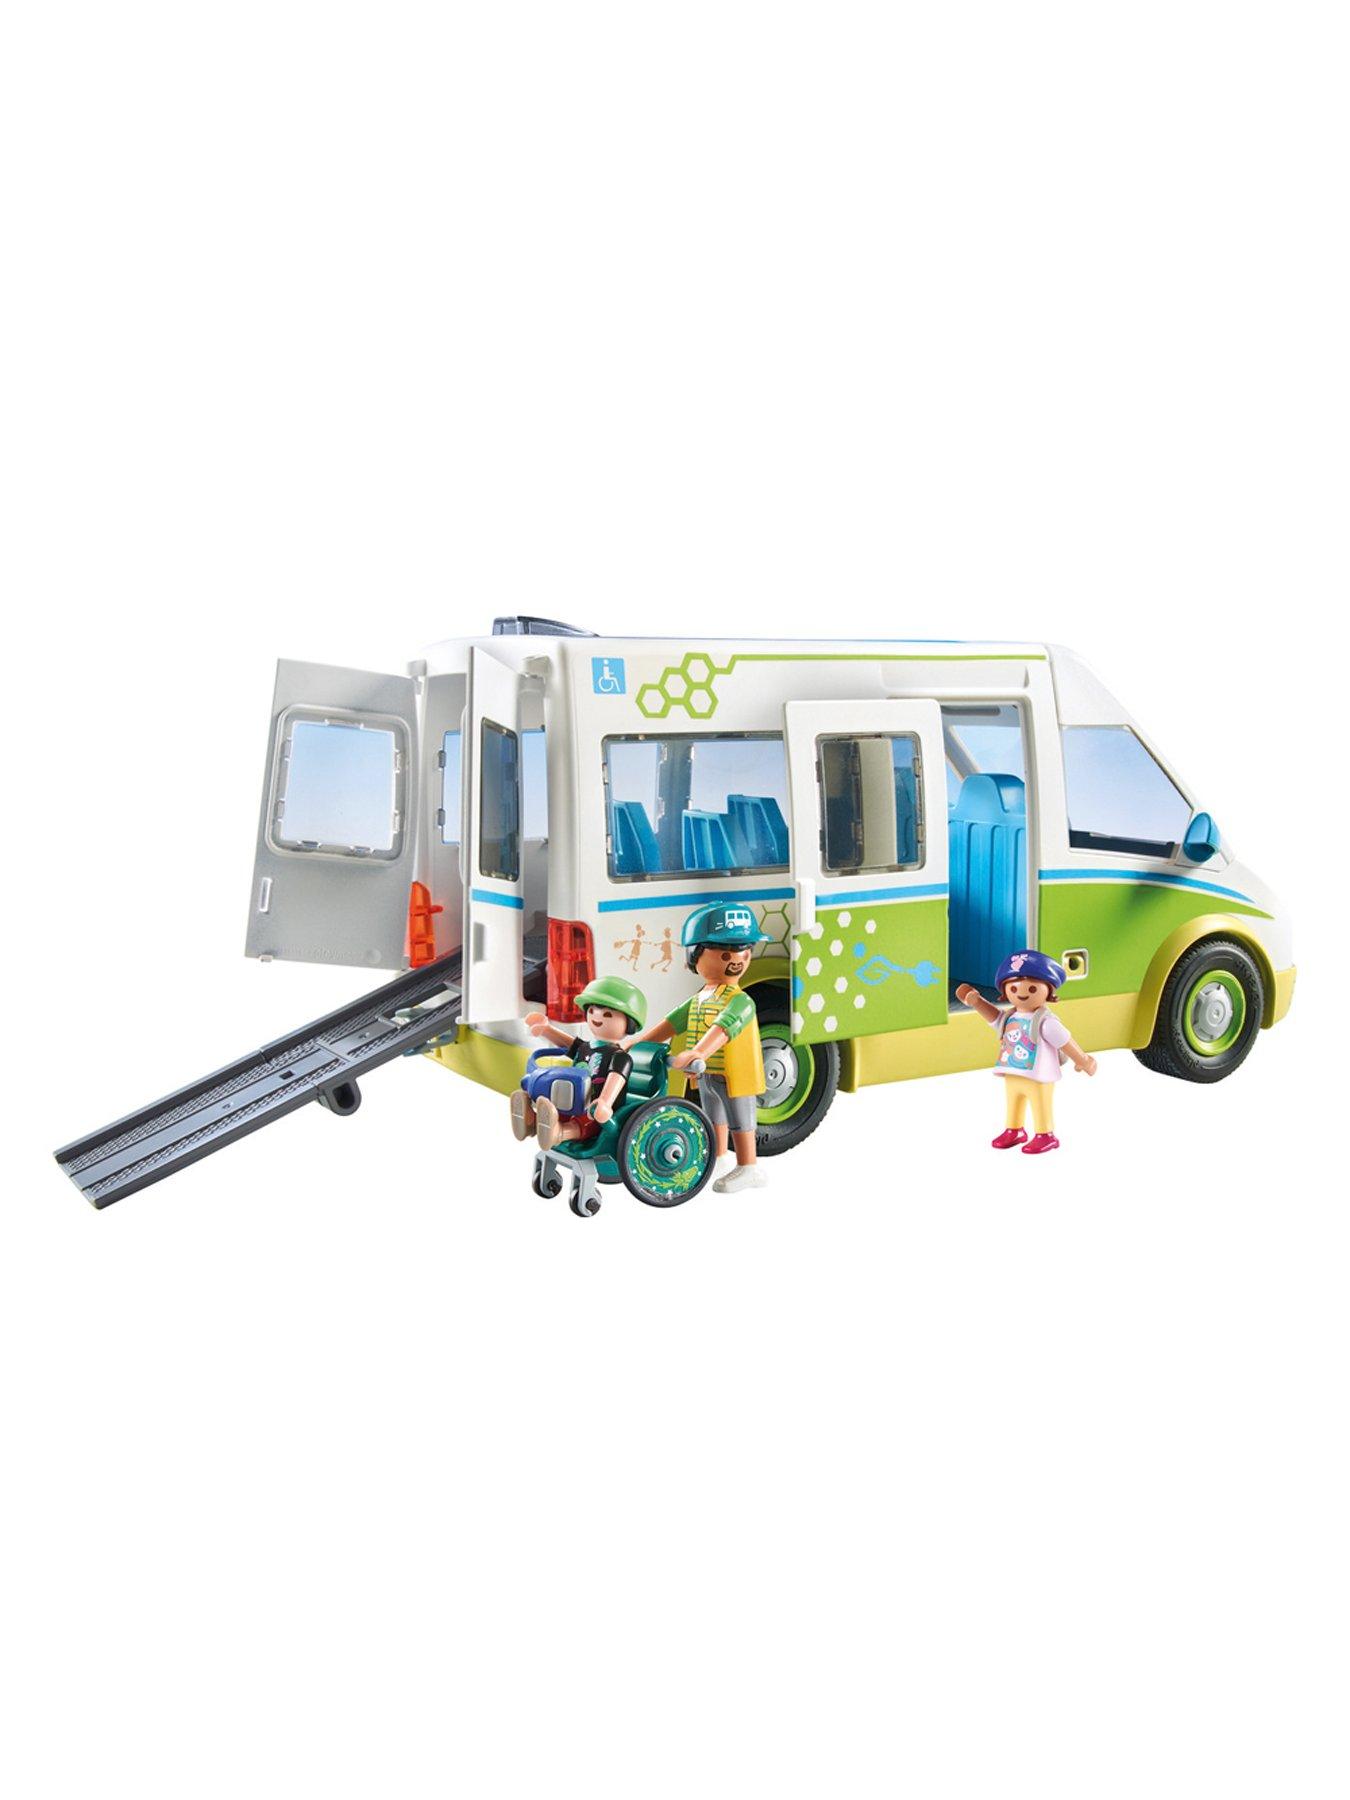 Playmobil Ambulance - A2Z Science & Learning Toy Store